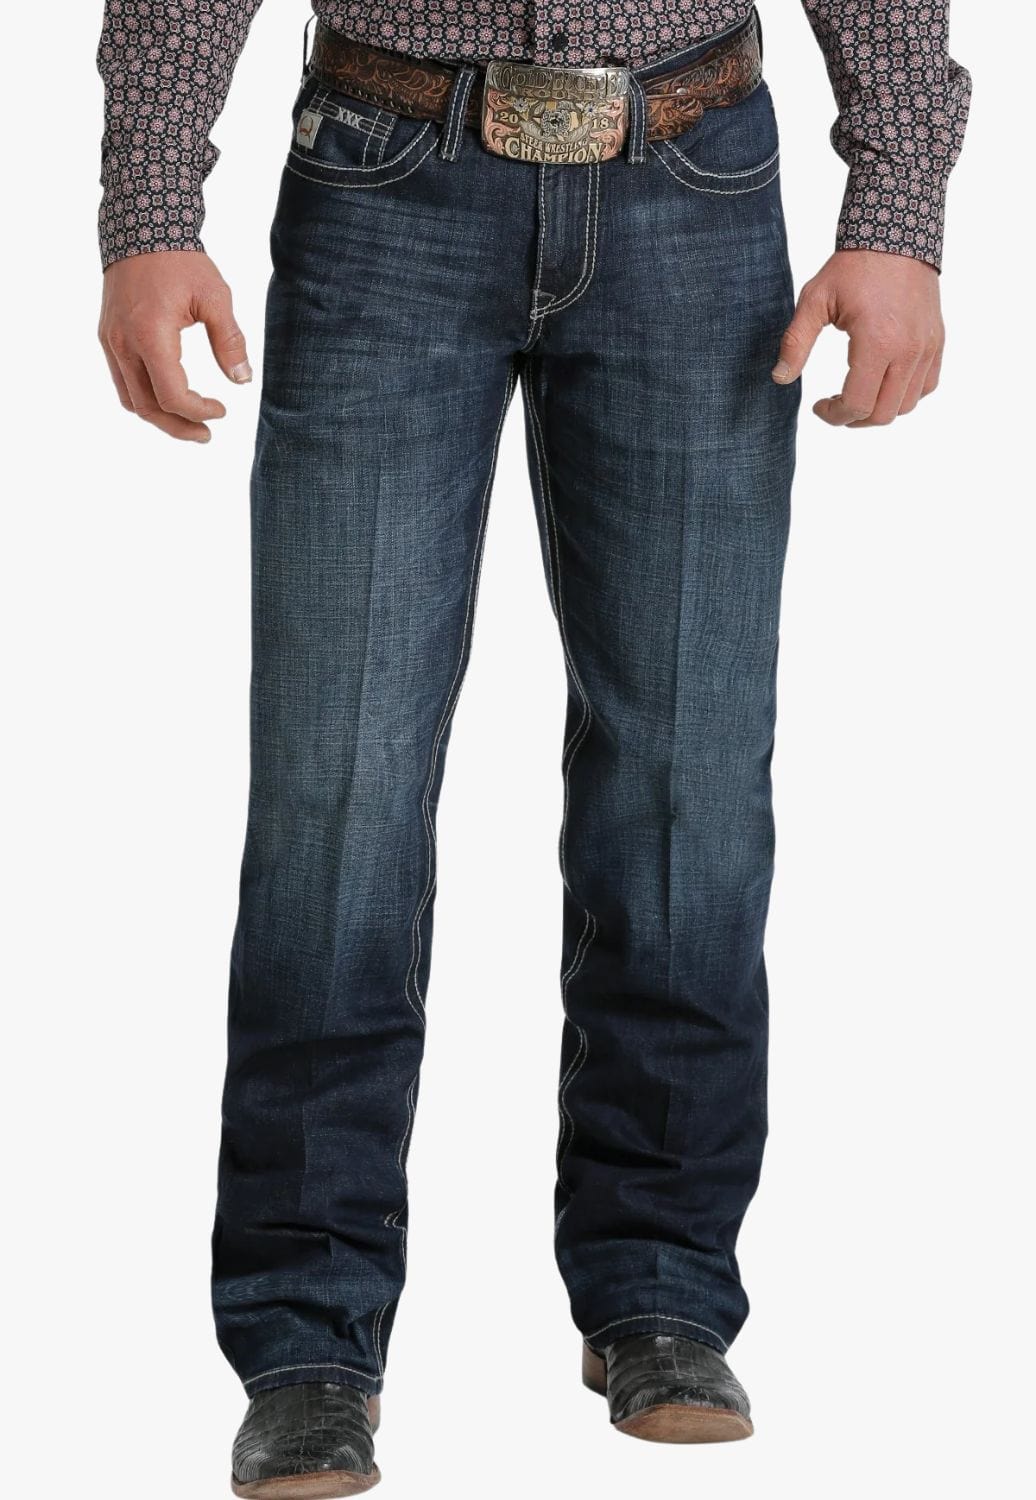 Cinch CLOTHING-Mens Jeans Cinch Mens Grant Relaxed Fit Boot Cut Jean